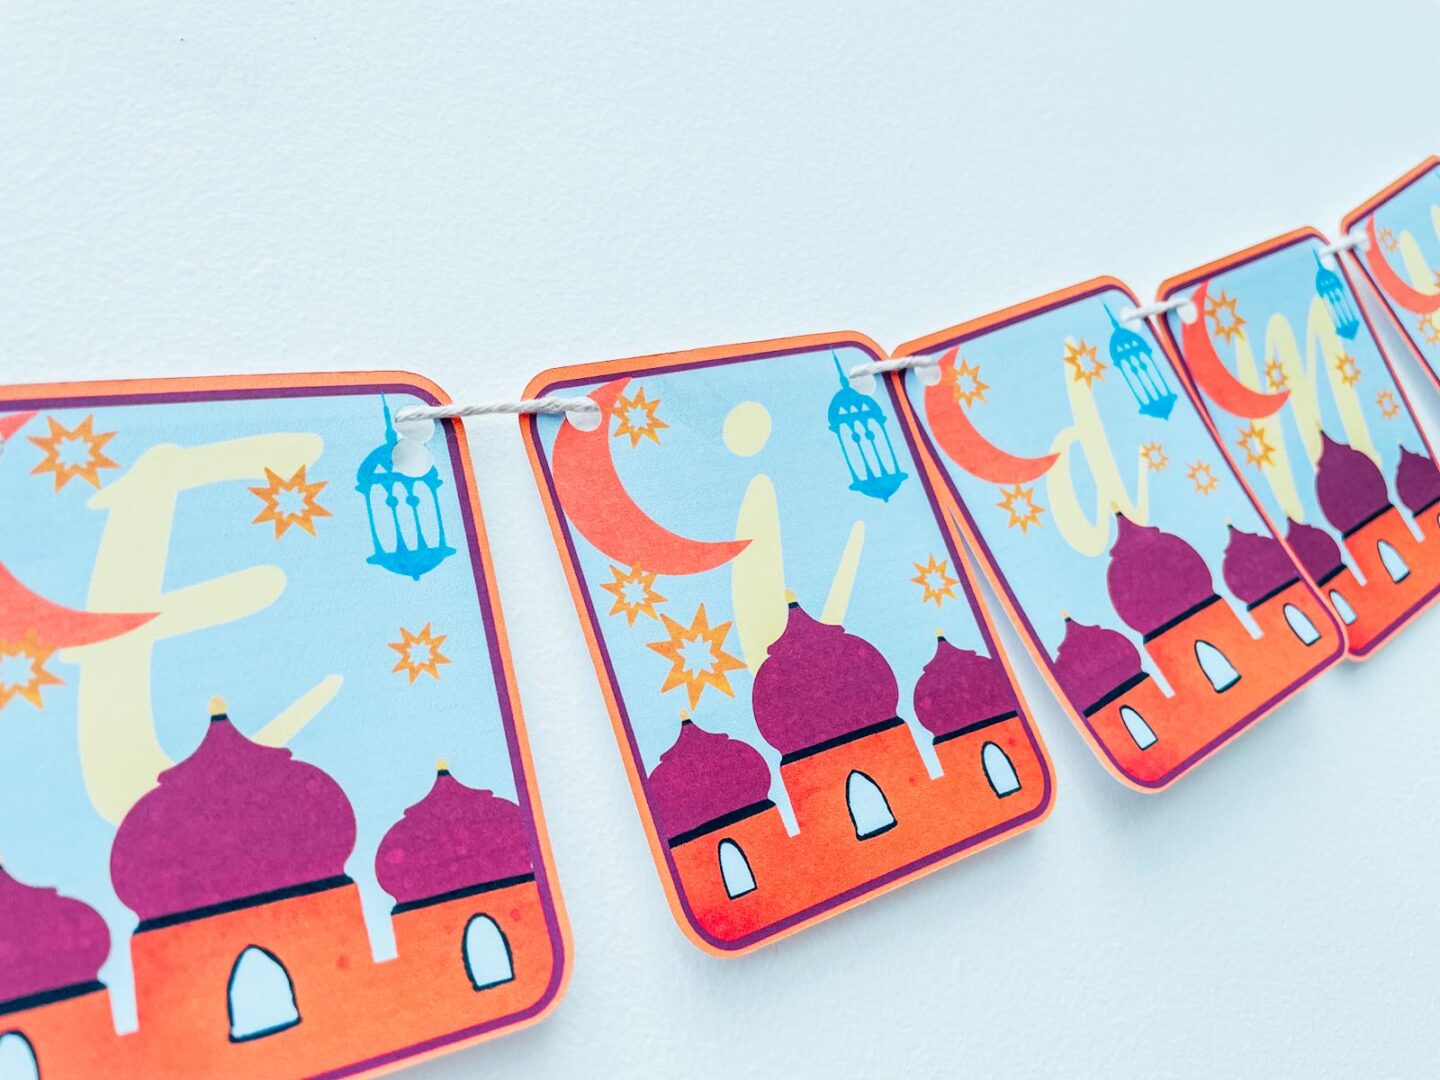 Bunting with a sky scene and mosque on